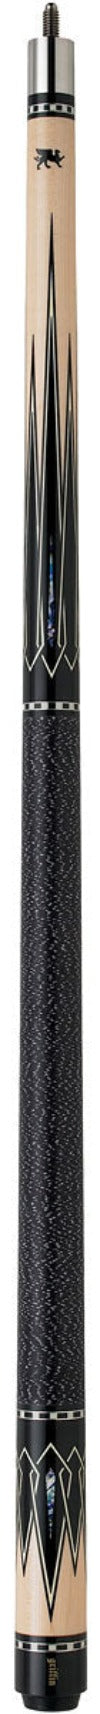 Griffin Griffin GR26 Pool Cue Pool Cue